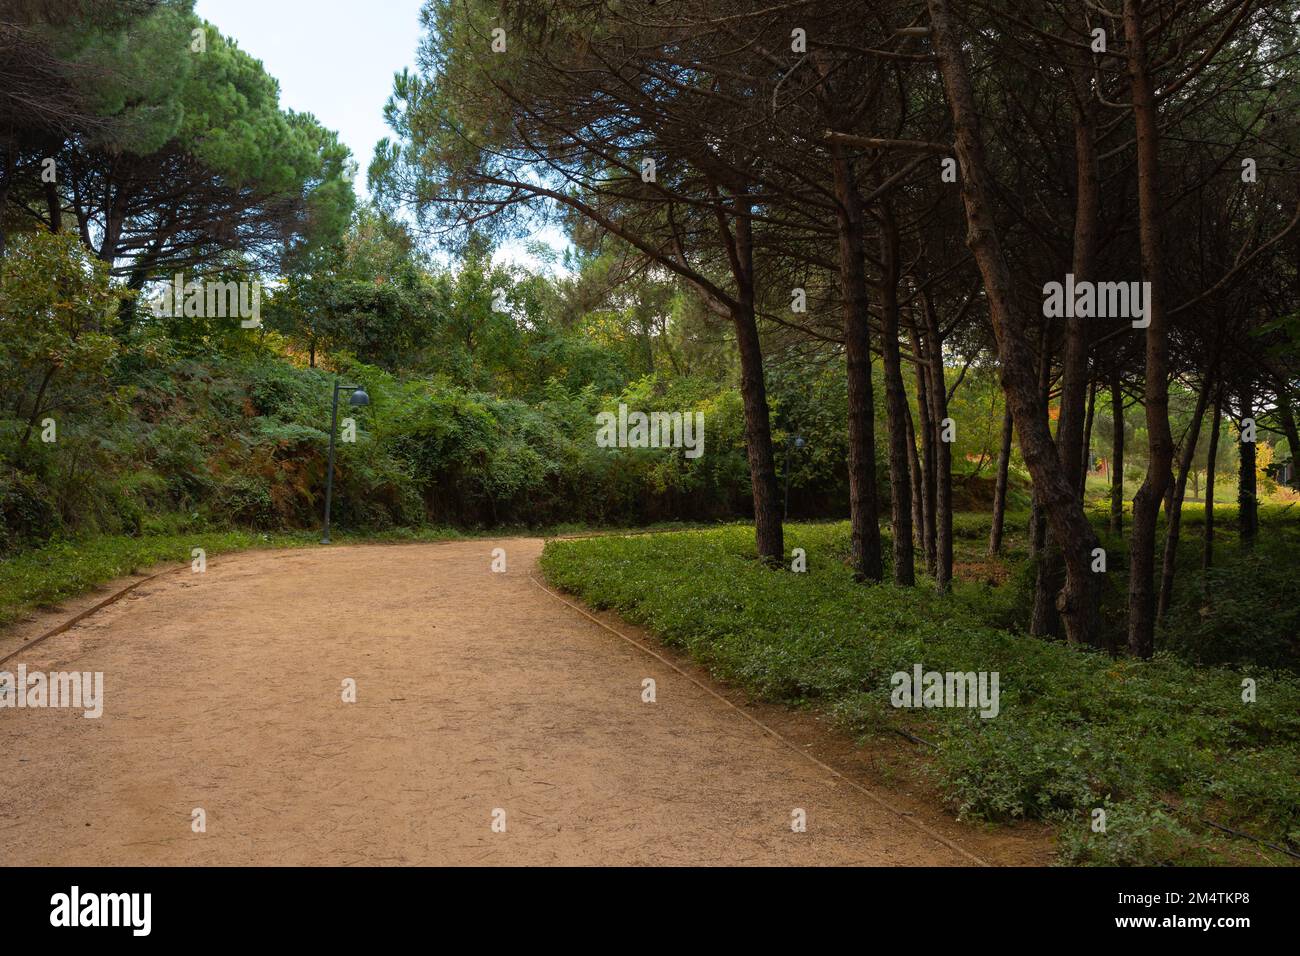 Dirt trail in the park for jog or hike. Landscape architecture concept photo. Haciosman or Ataturk city forest in Istanbul. Stock Photo